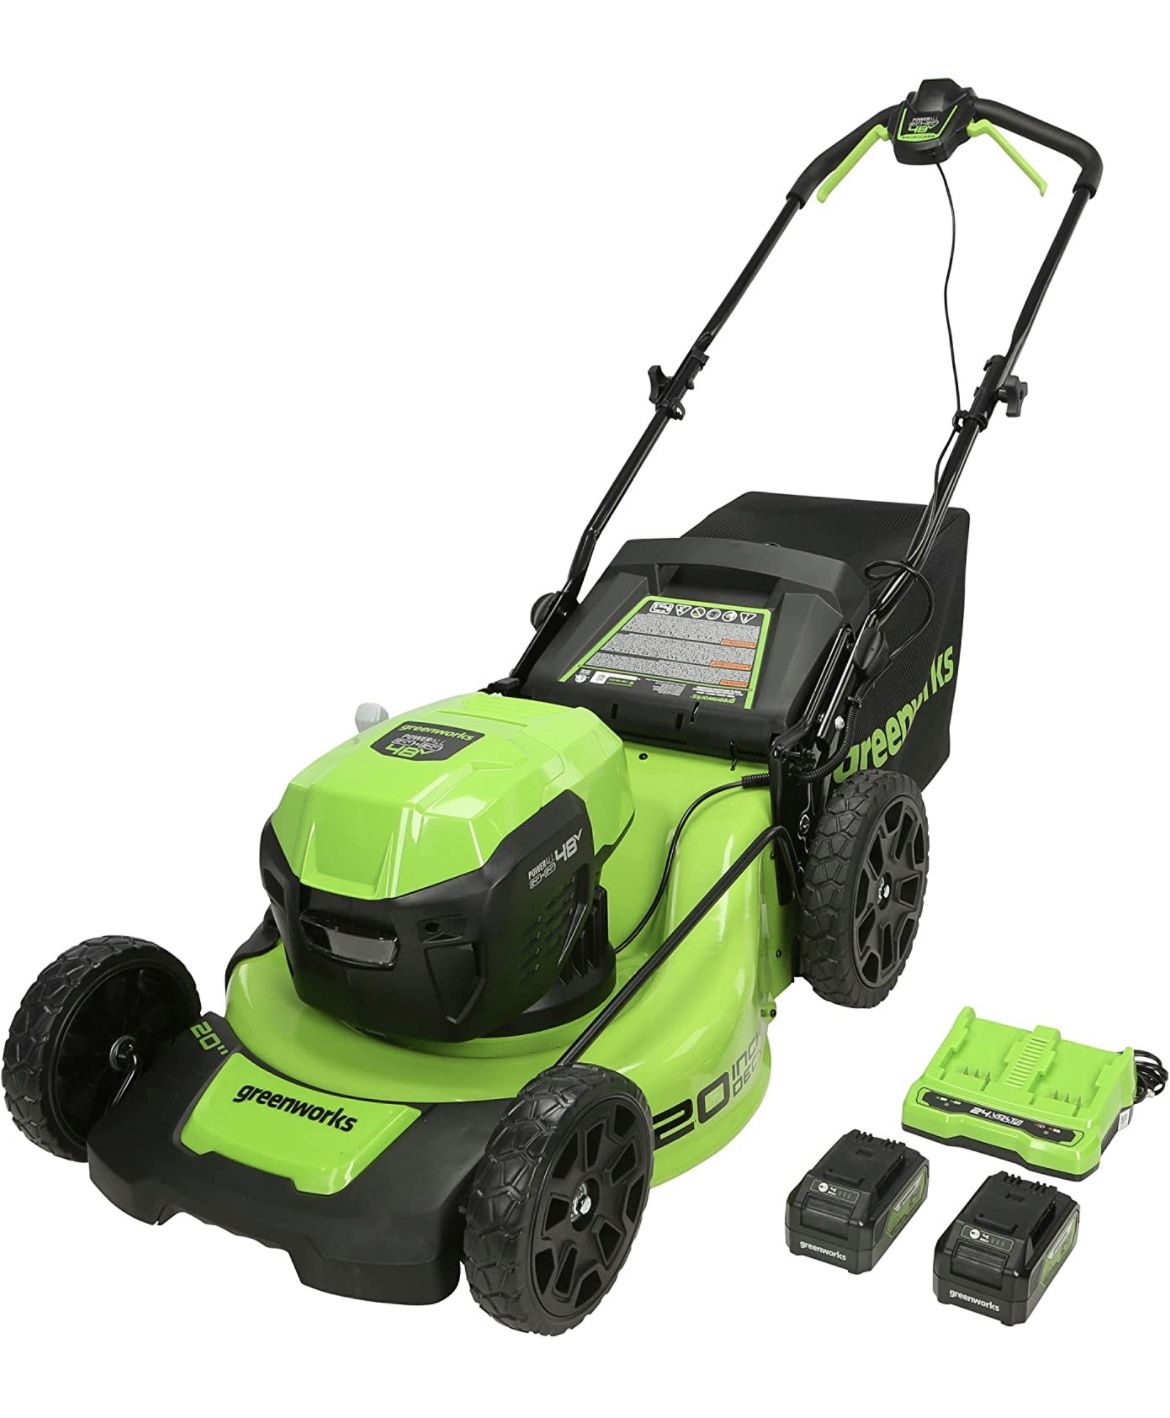 Hot For The Summer! Greenworks Lawn mower - Brand New Never Opened